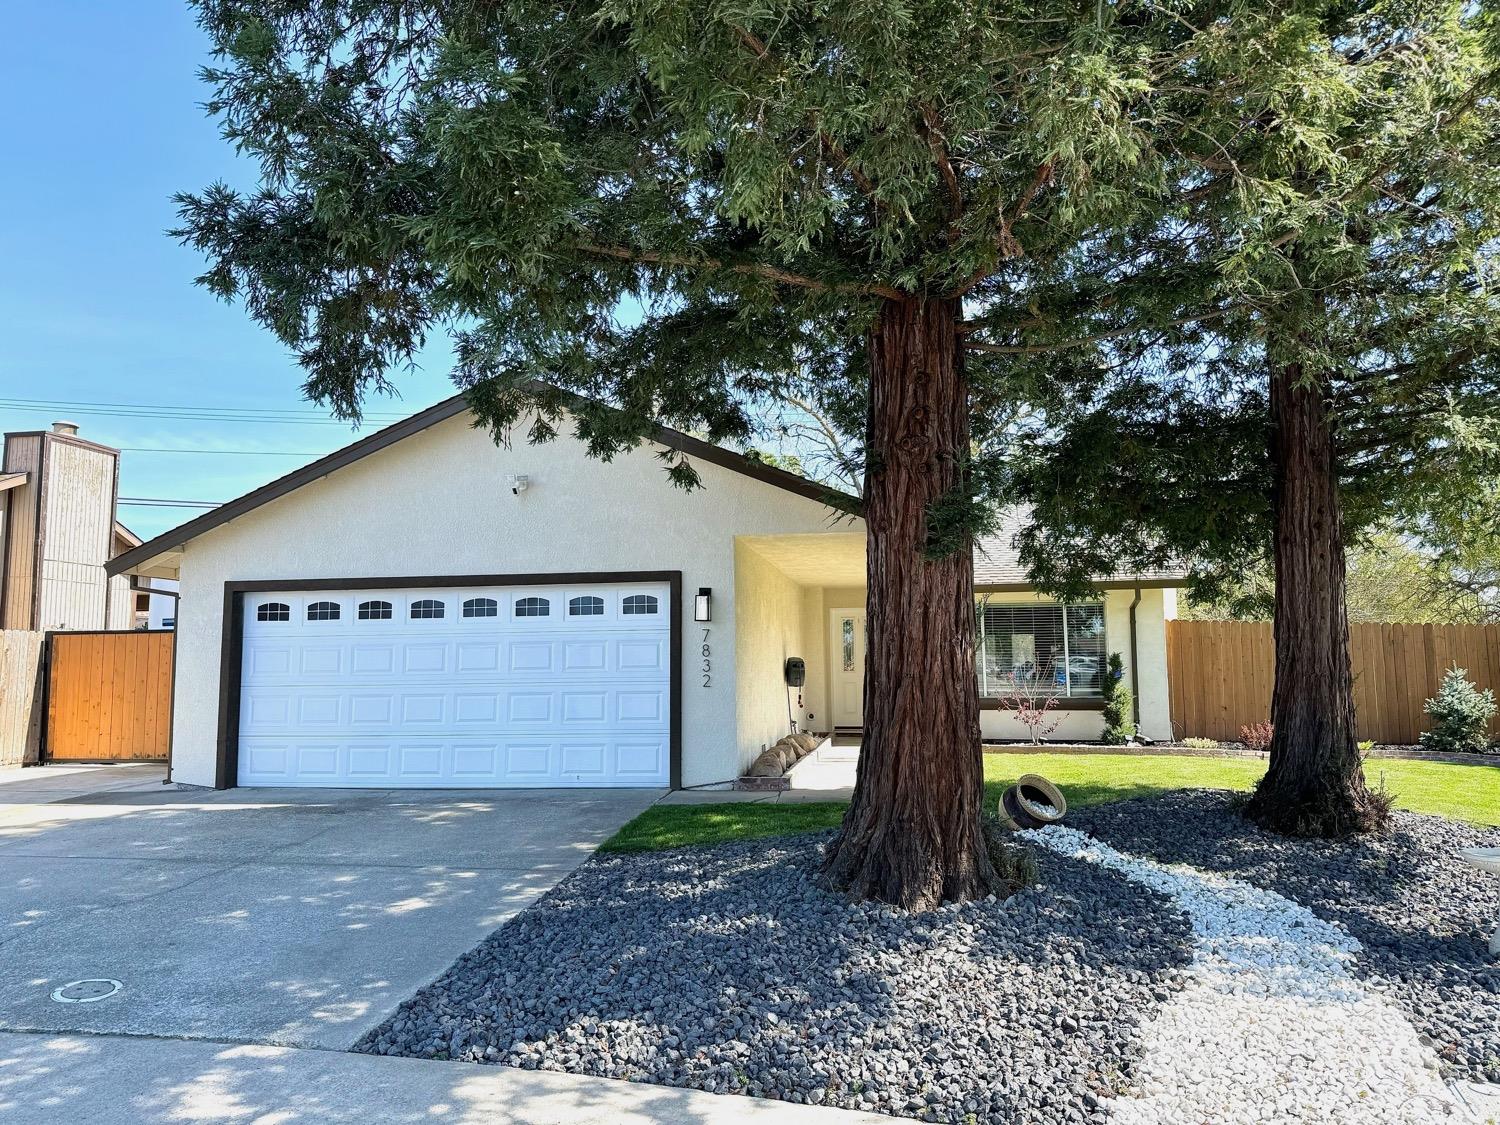 Photo of 7832 Caber Wy in Antelope, CA